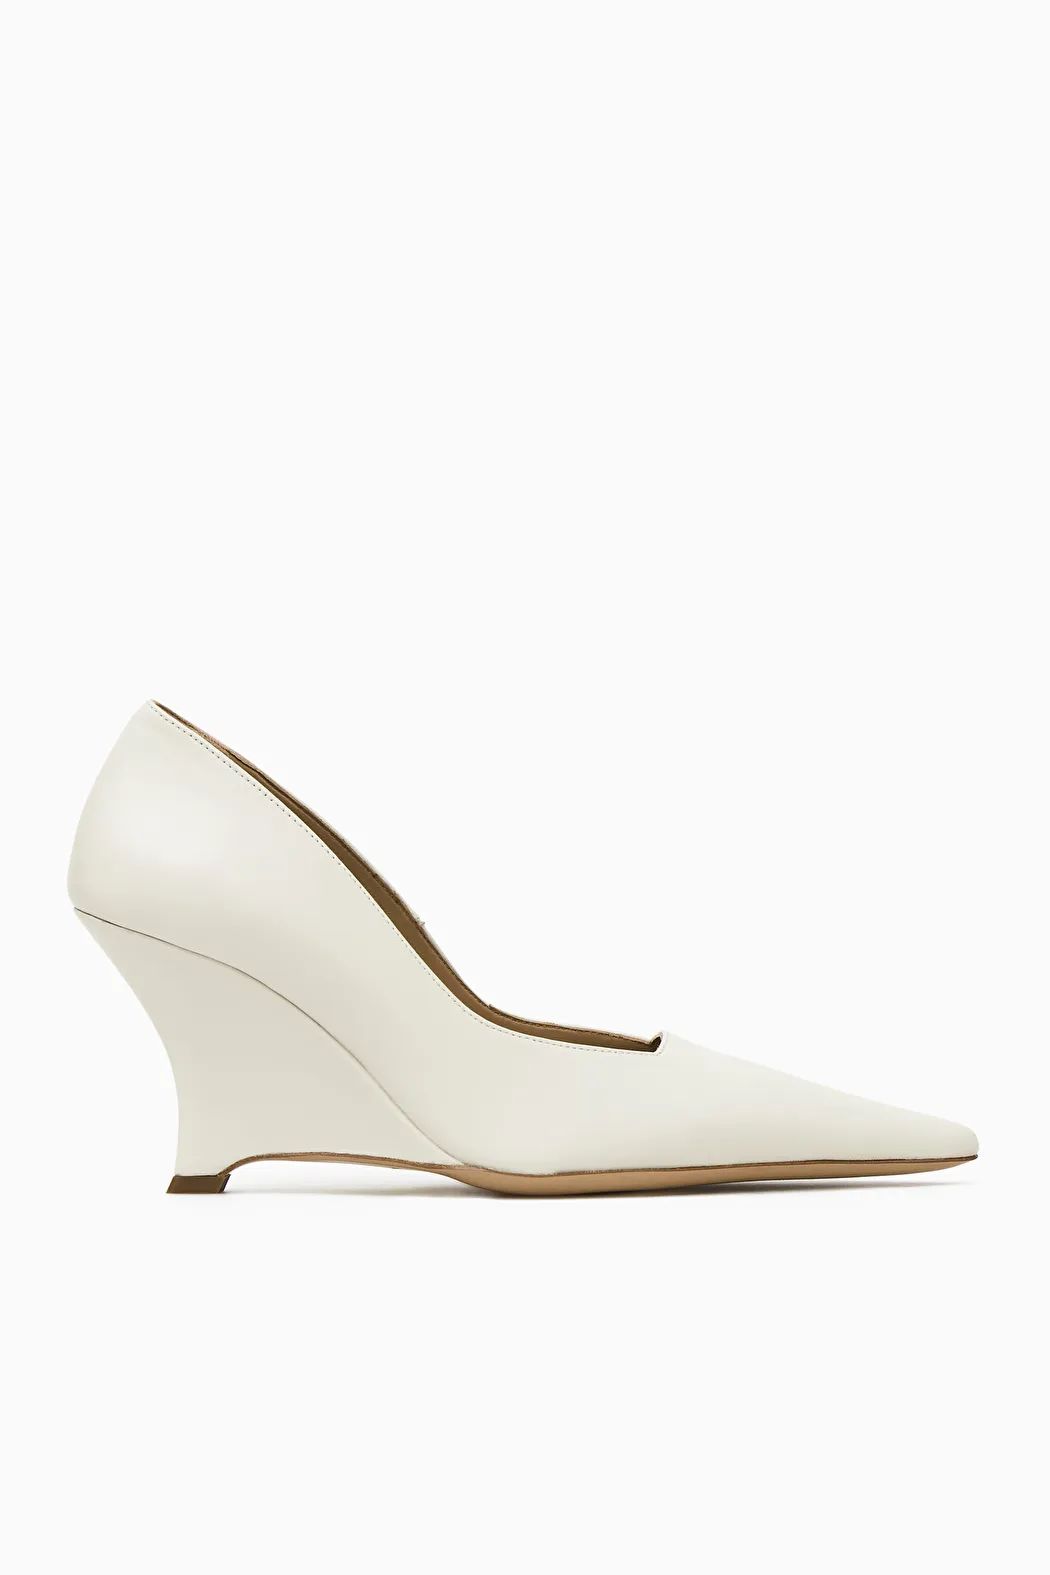 POINTED LEATHER WEDGE PUMPS | COS UK